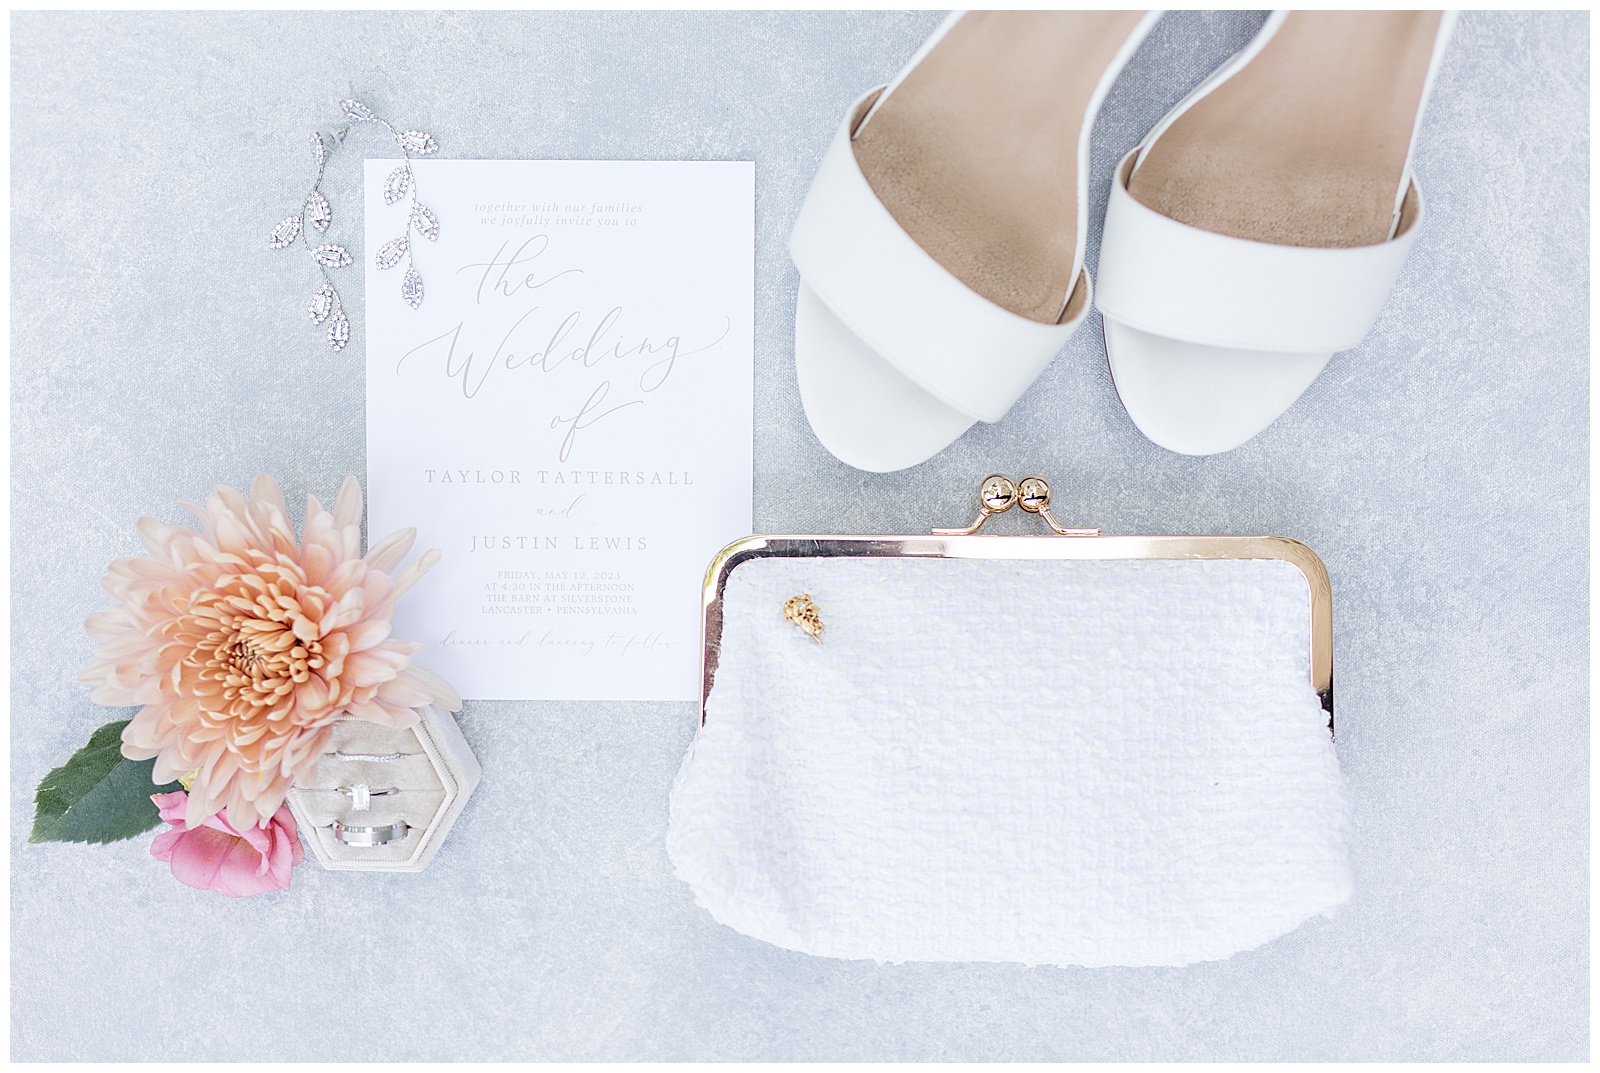 bride's white sandals and white clutch beside wedding invitation and bottle of perfume in lancaster county